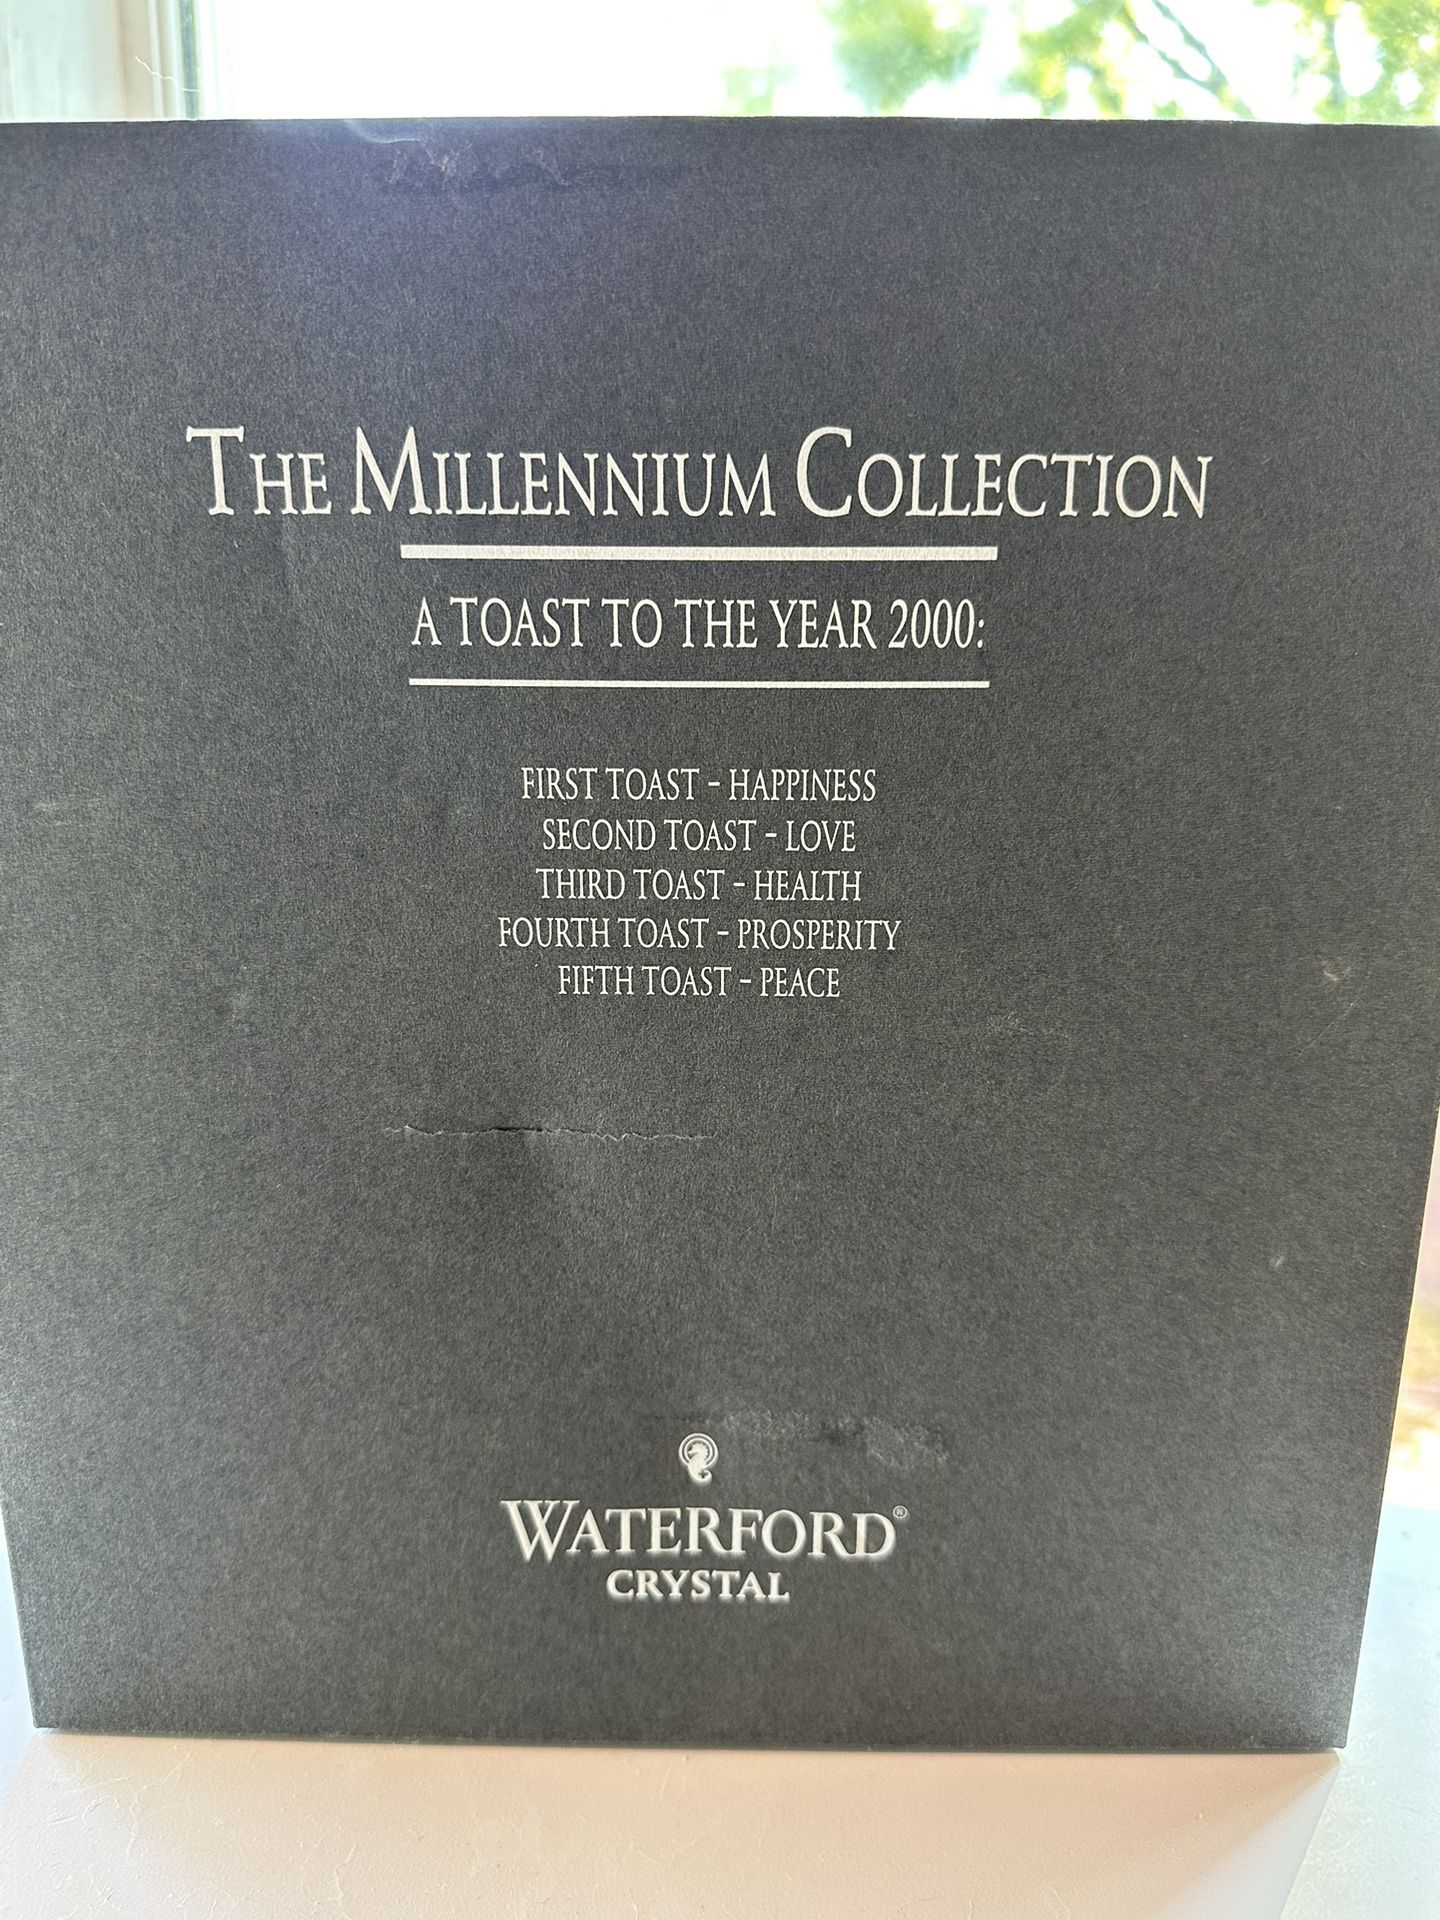 Waterford Crystal Millennium Collection Toasting Flutes Second Toast Love